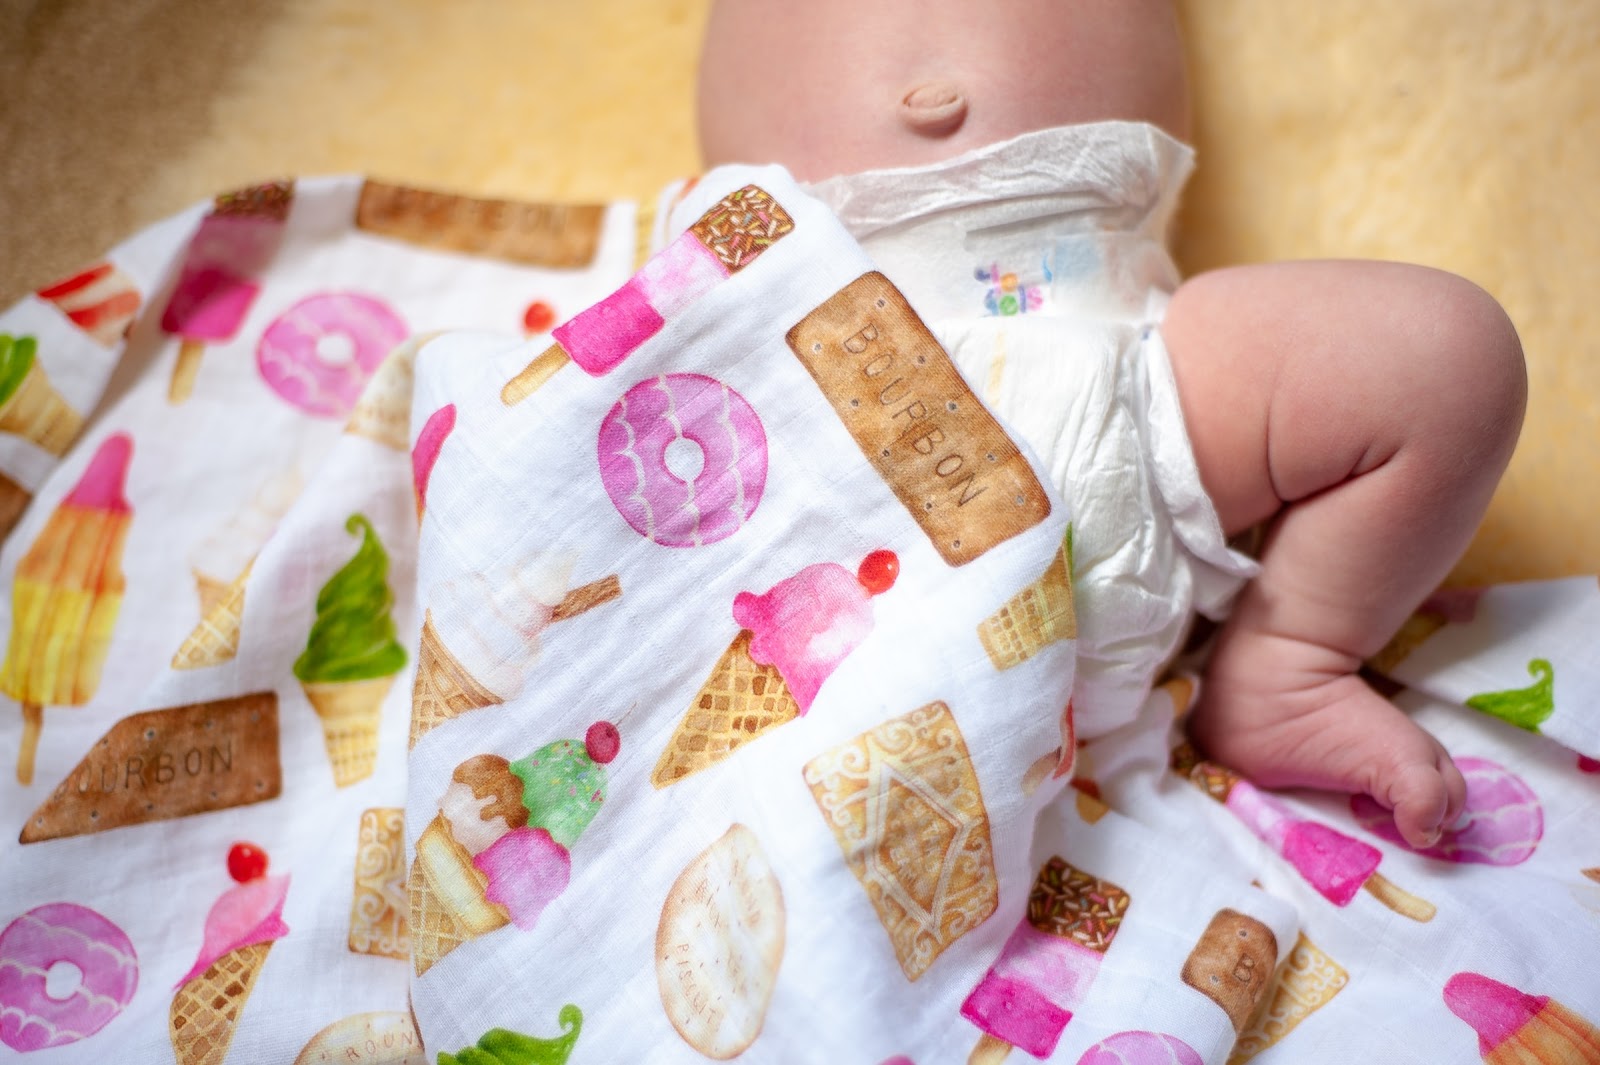 This image shows the lower half of a baby wearing only a diaper, slightly covered by a baby blanket.